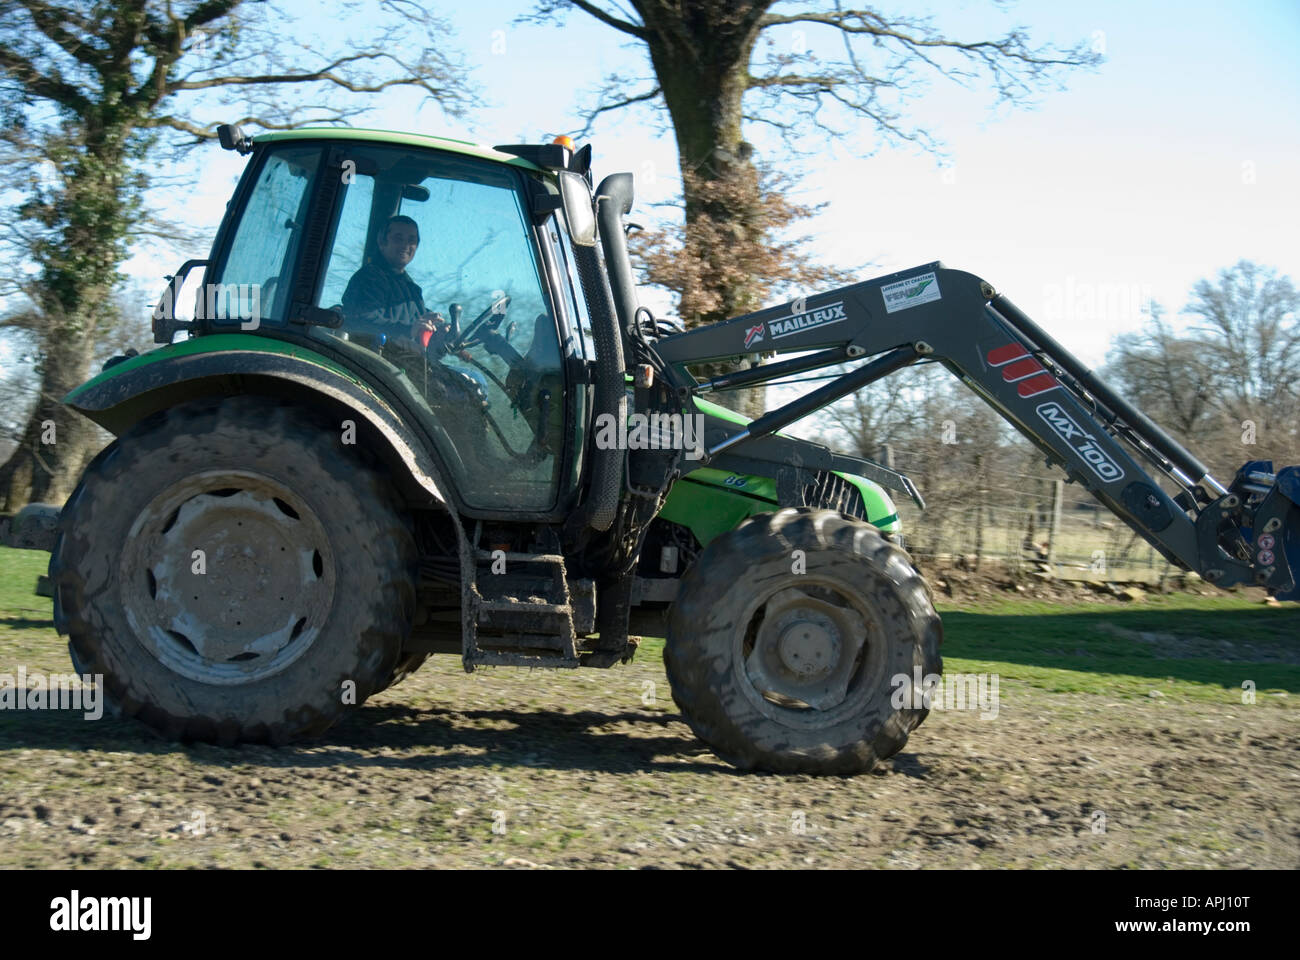 Stock Photo of a Deutz Fahr tractor The photo was taken in the Limousin region of France Stock Photo